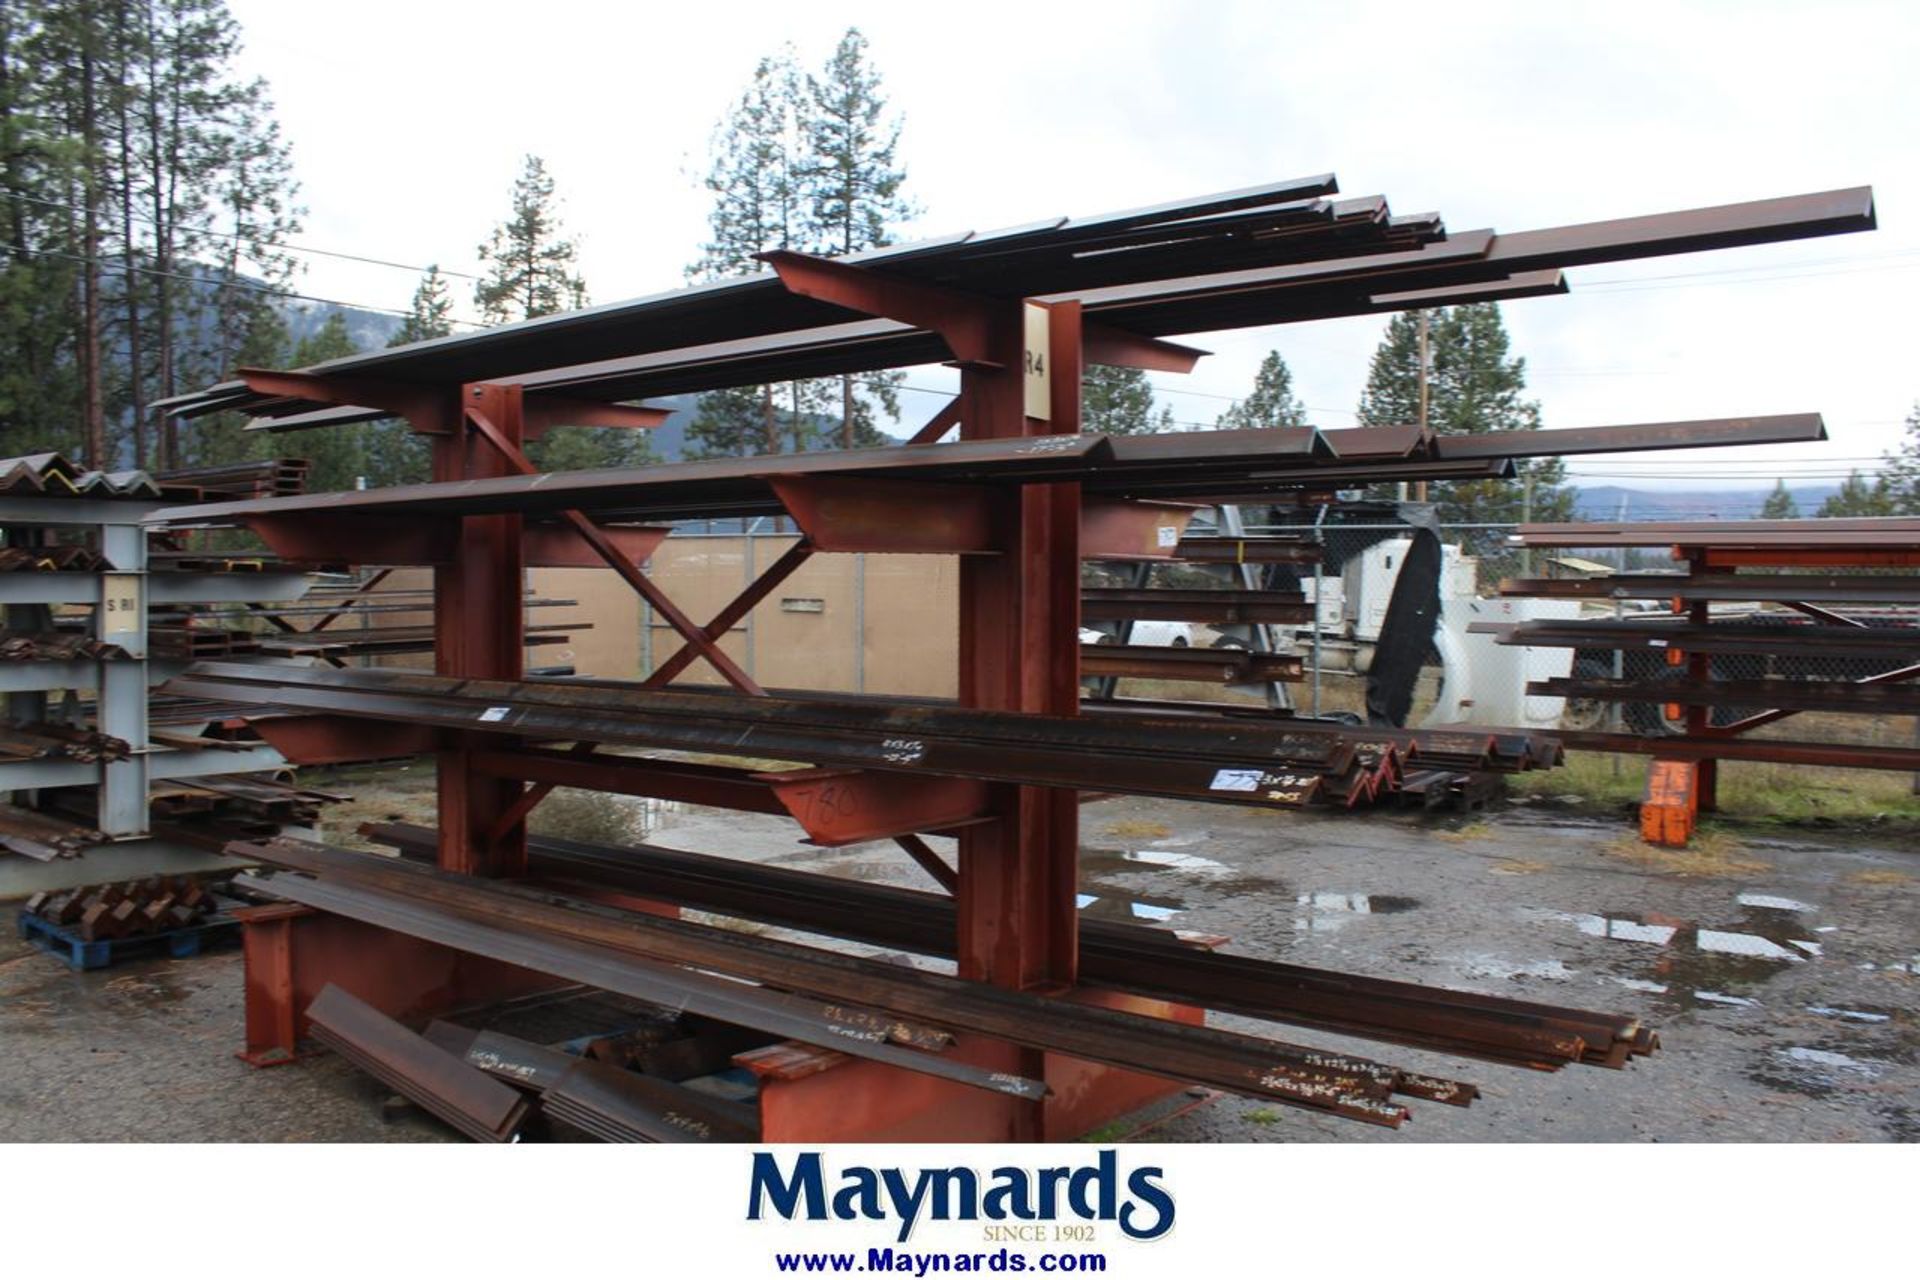 lot of angle iron on cantilever rack